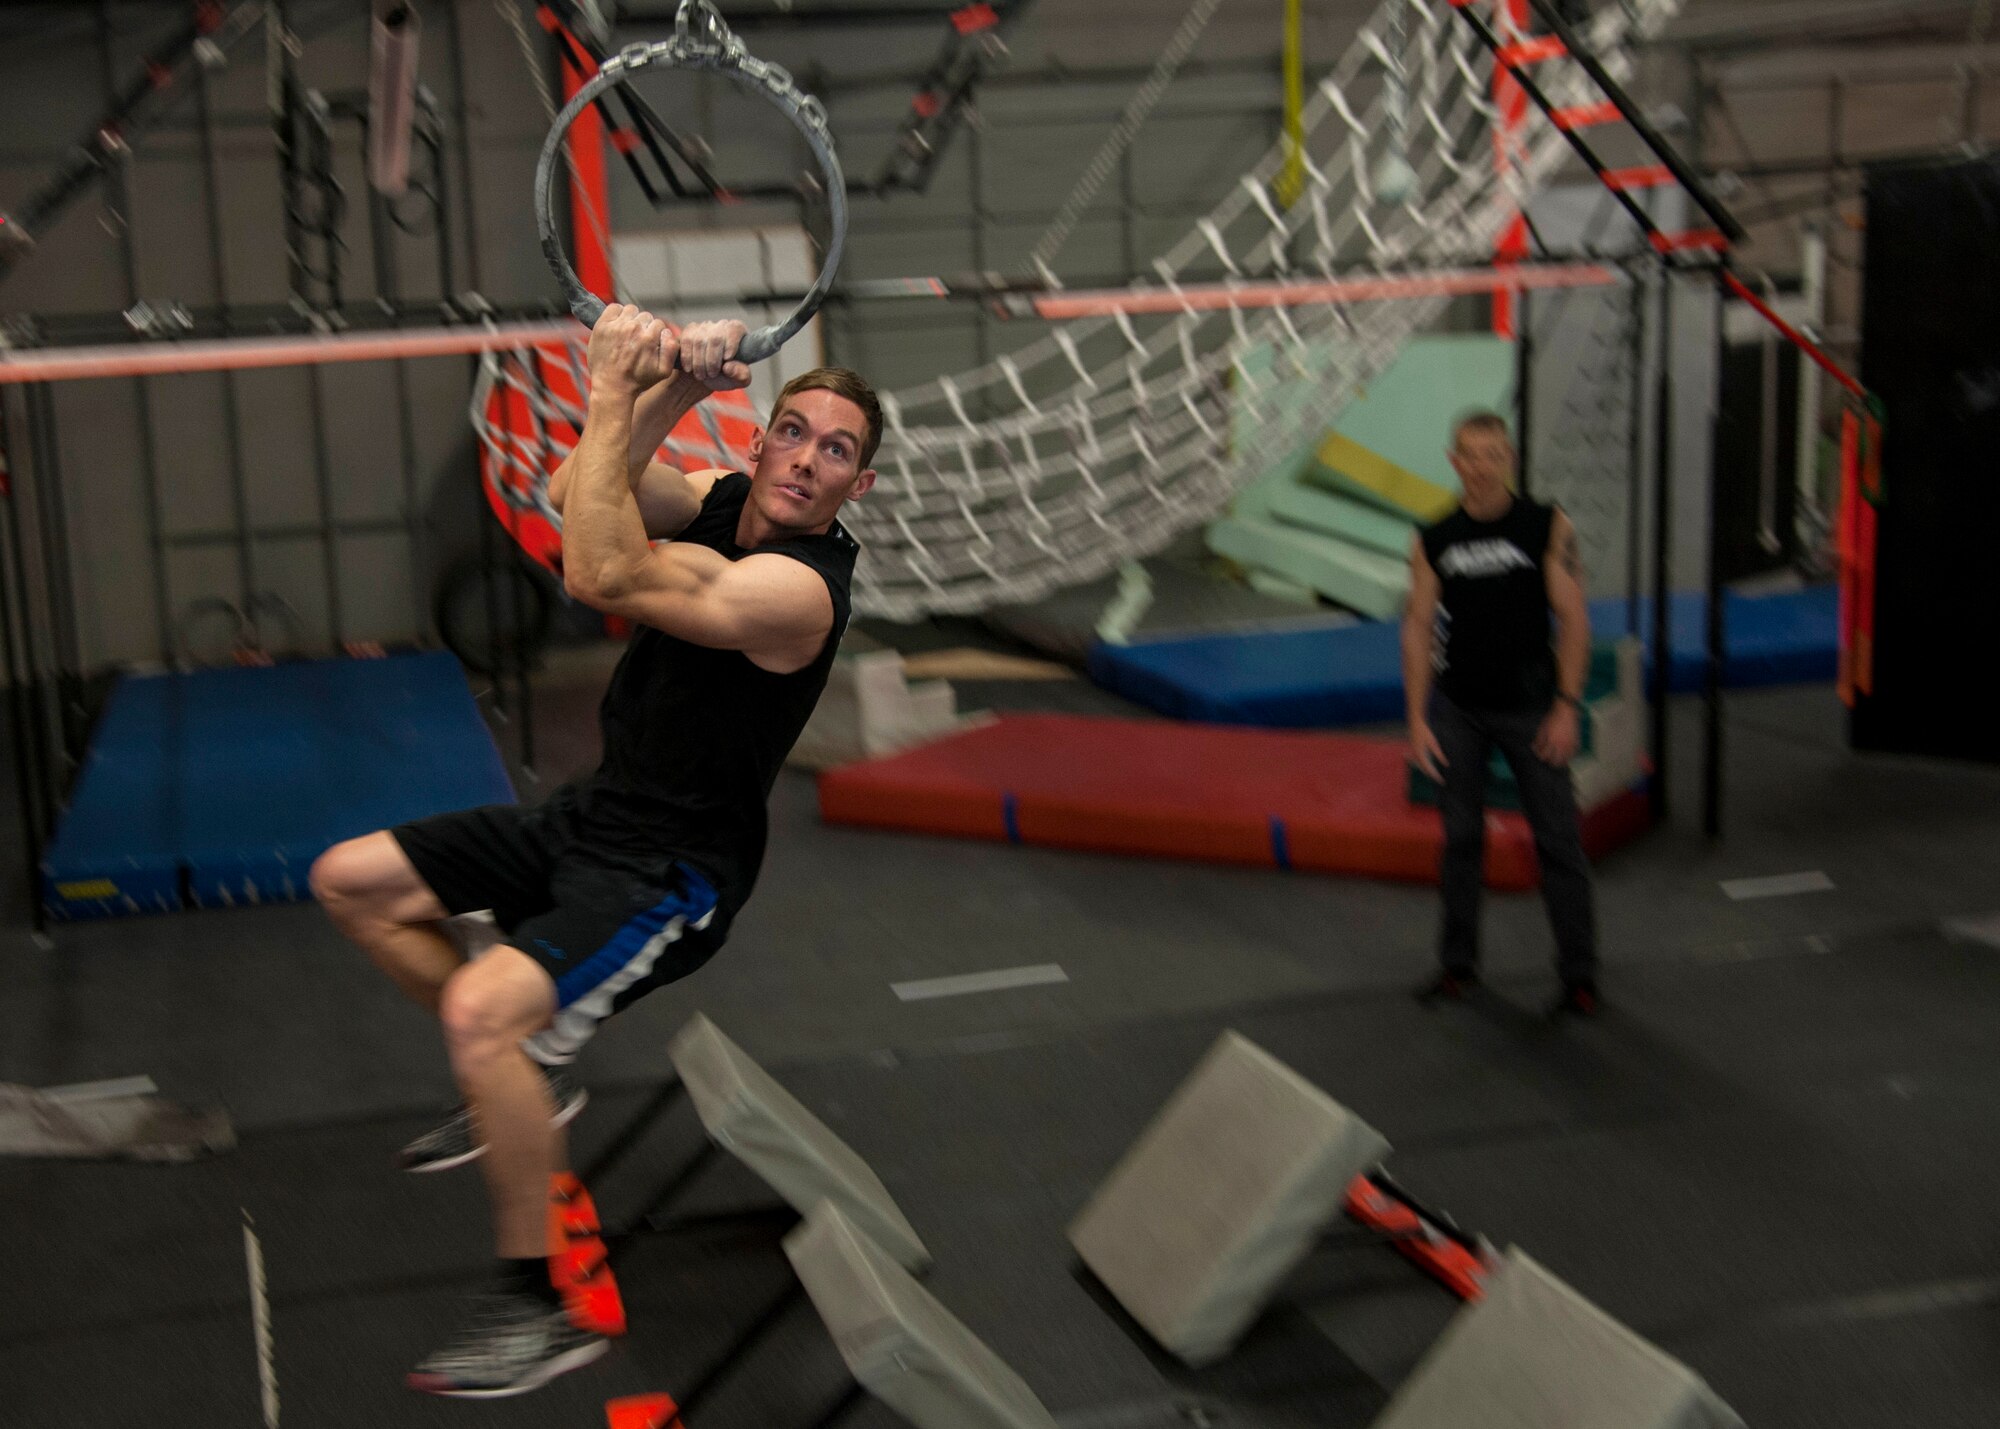 Tech. Sgt. David Krause, 58th Maintenance Squadron CV-22 “osprey” crew chief, swings on an obstacle at the Ninja Force Gym, Albuquerque, N.M., Dec. 4. Krause began his ninja obstacle training a year ago.